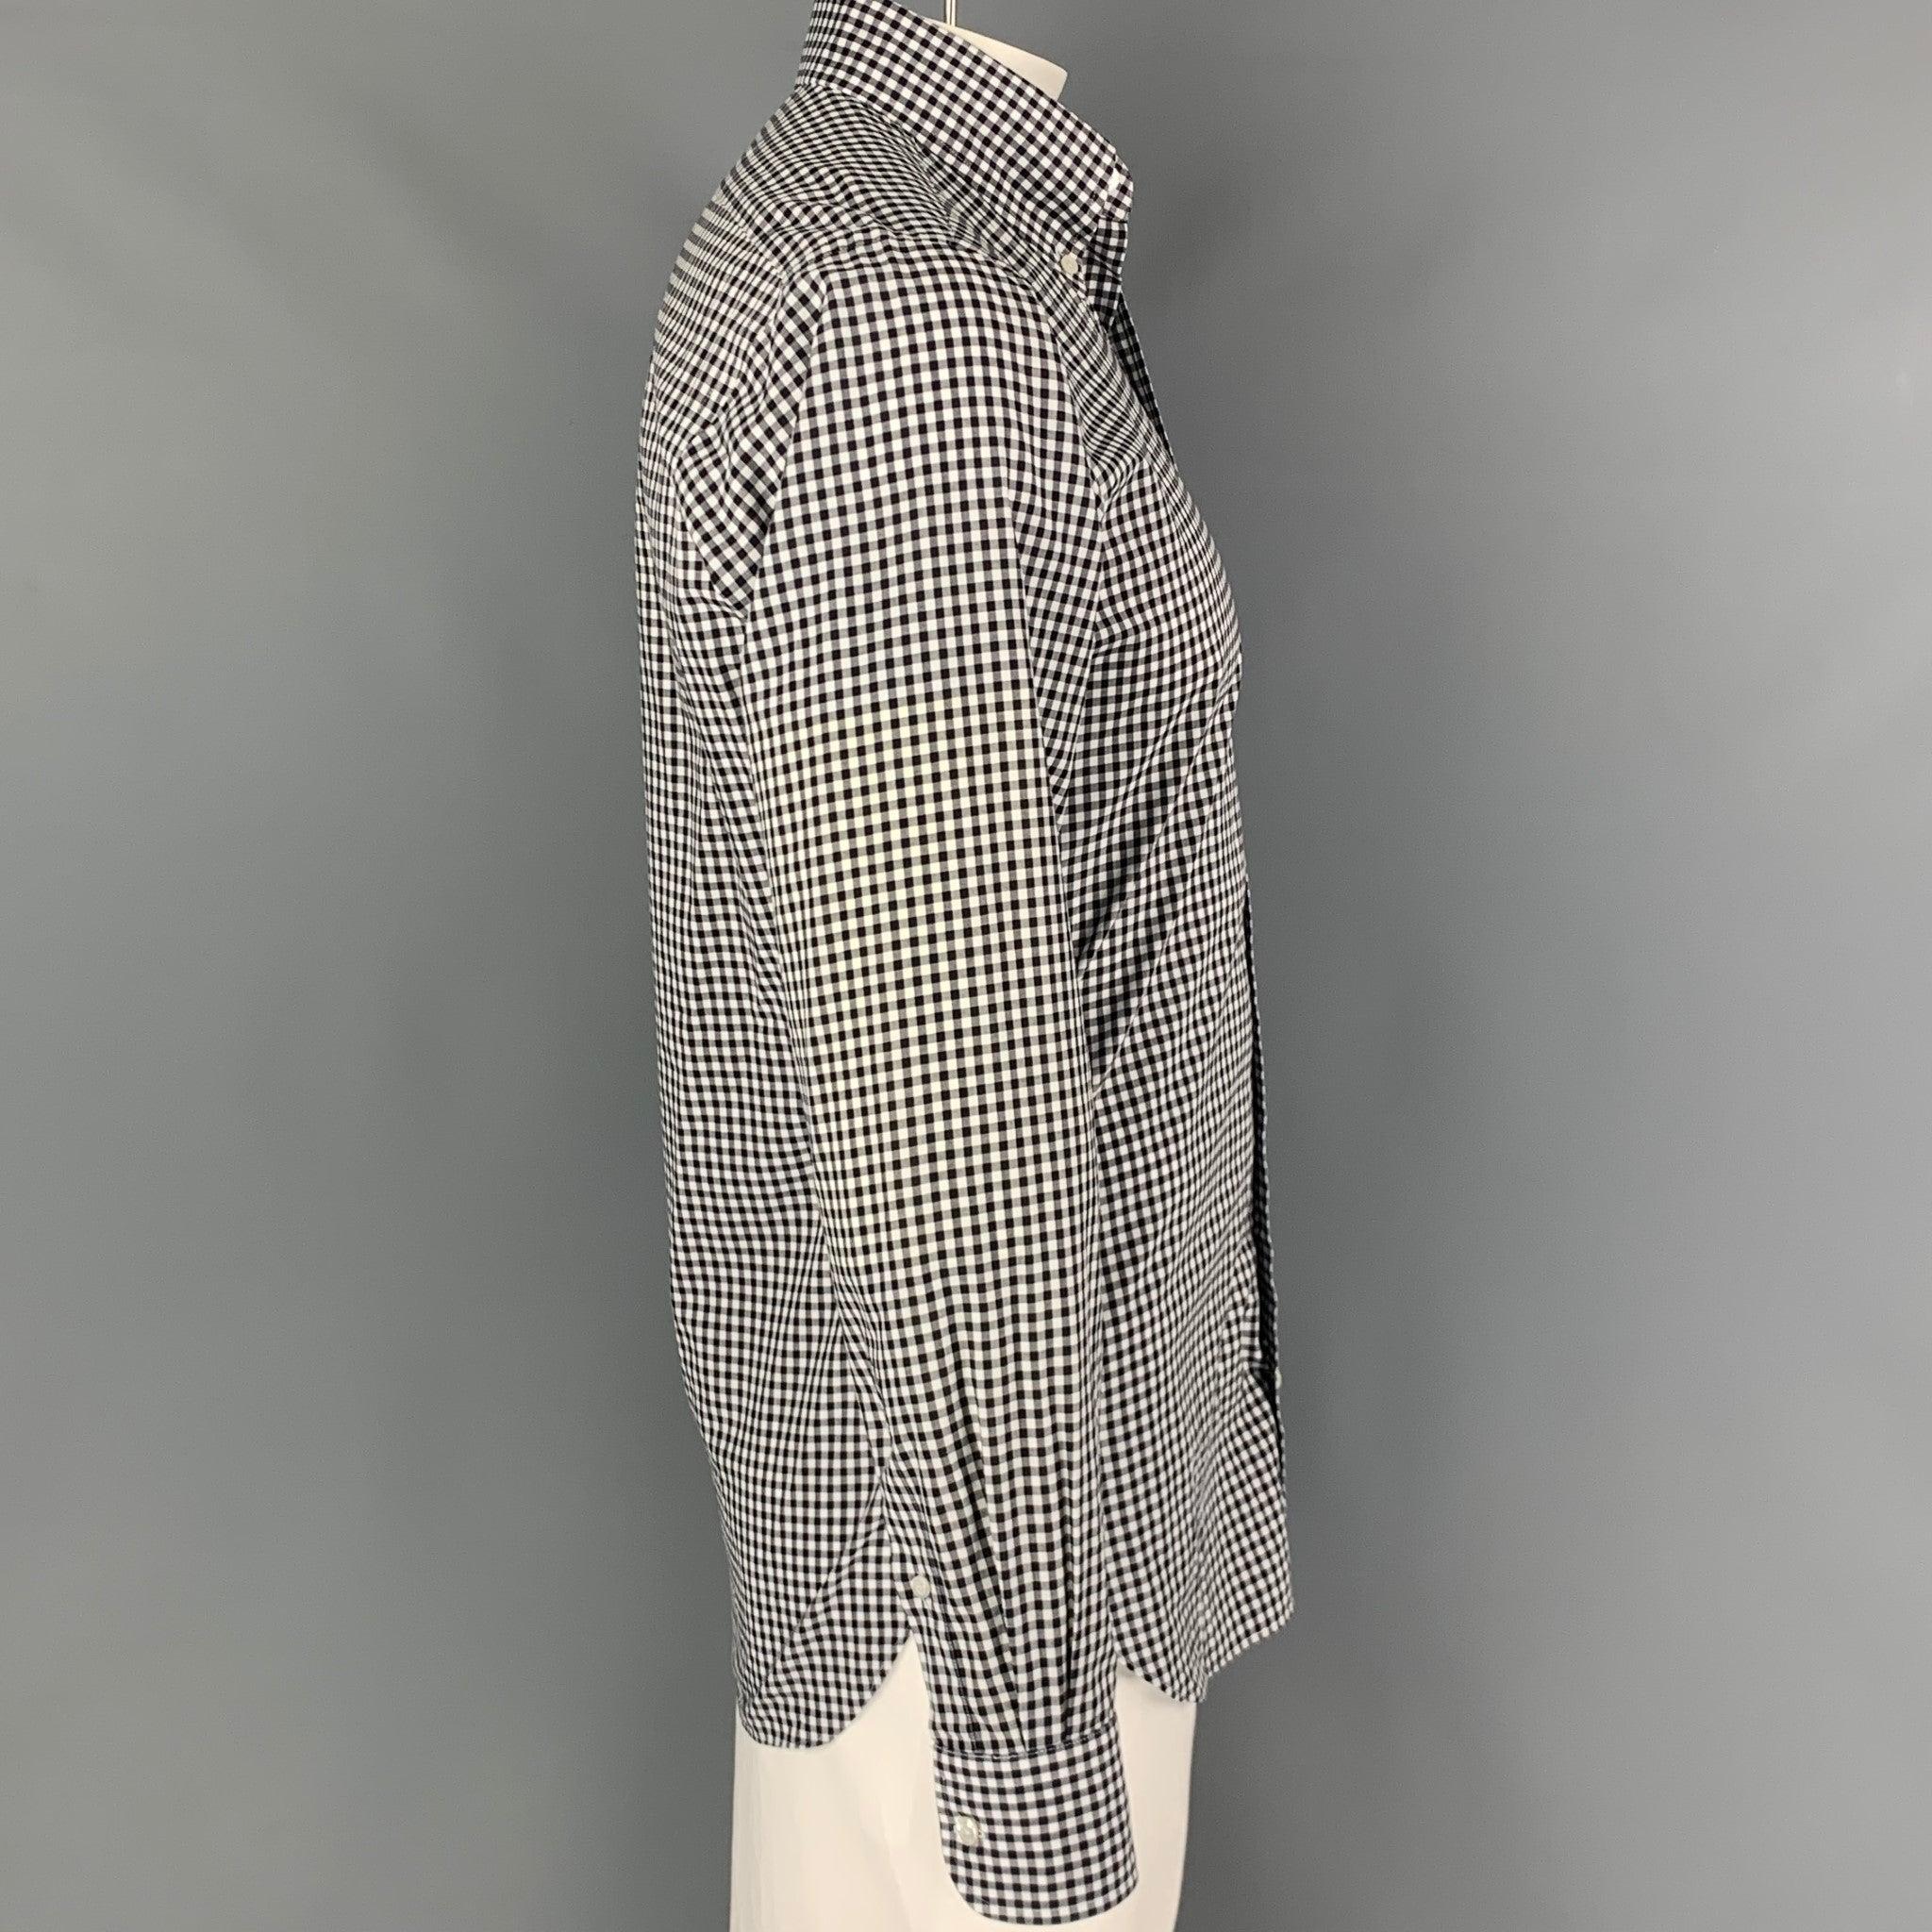 HAMILTON long sleeve shirt comes in a black & white gingham material featuring a classic style, button down collar, and a button up closure. Excellent
Pre-Owned Condition. Fabric tag removed.  

Marked:   MARCH18  

Measurements: 
 
Shoulder: 18